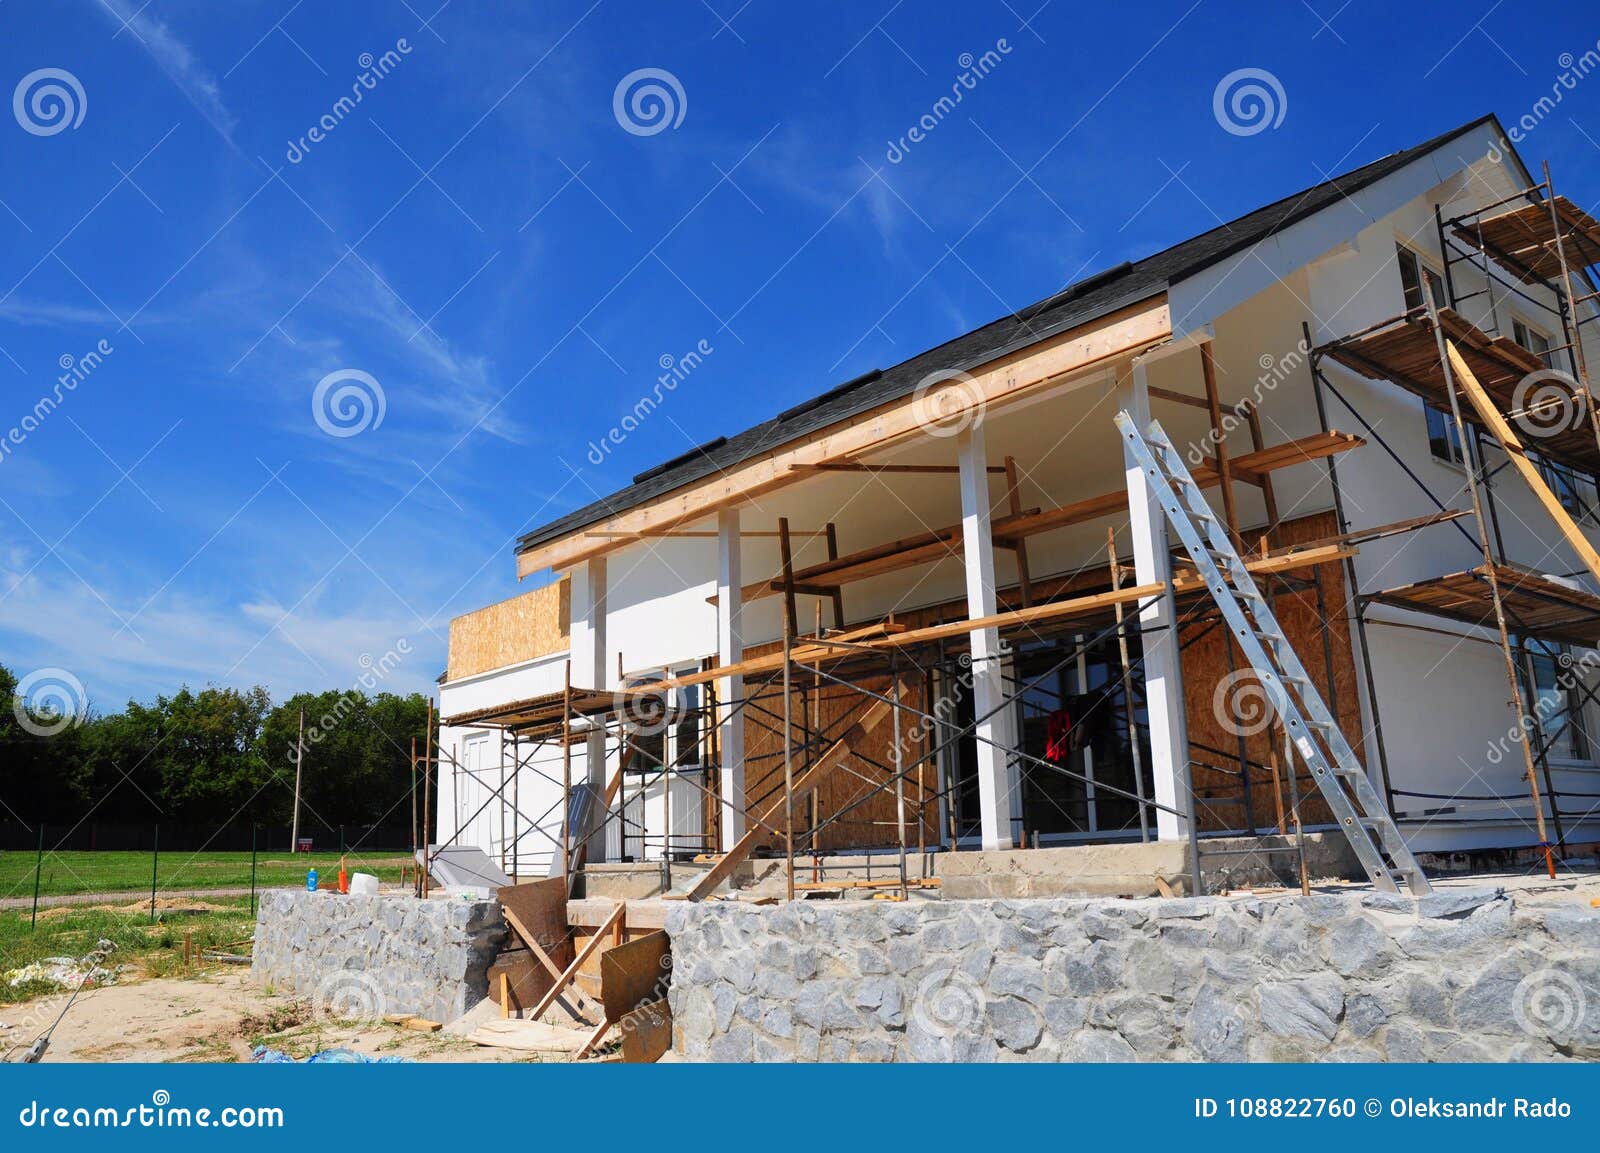 unfinished house. home remodeling and renovation. painting house wall with stucco and plastering. insulation house wall